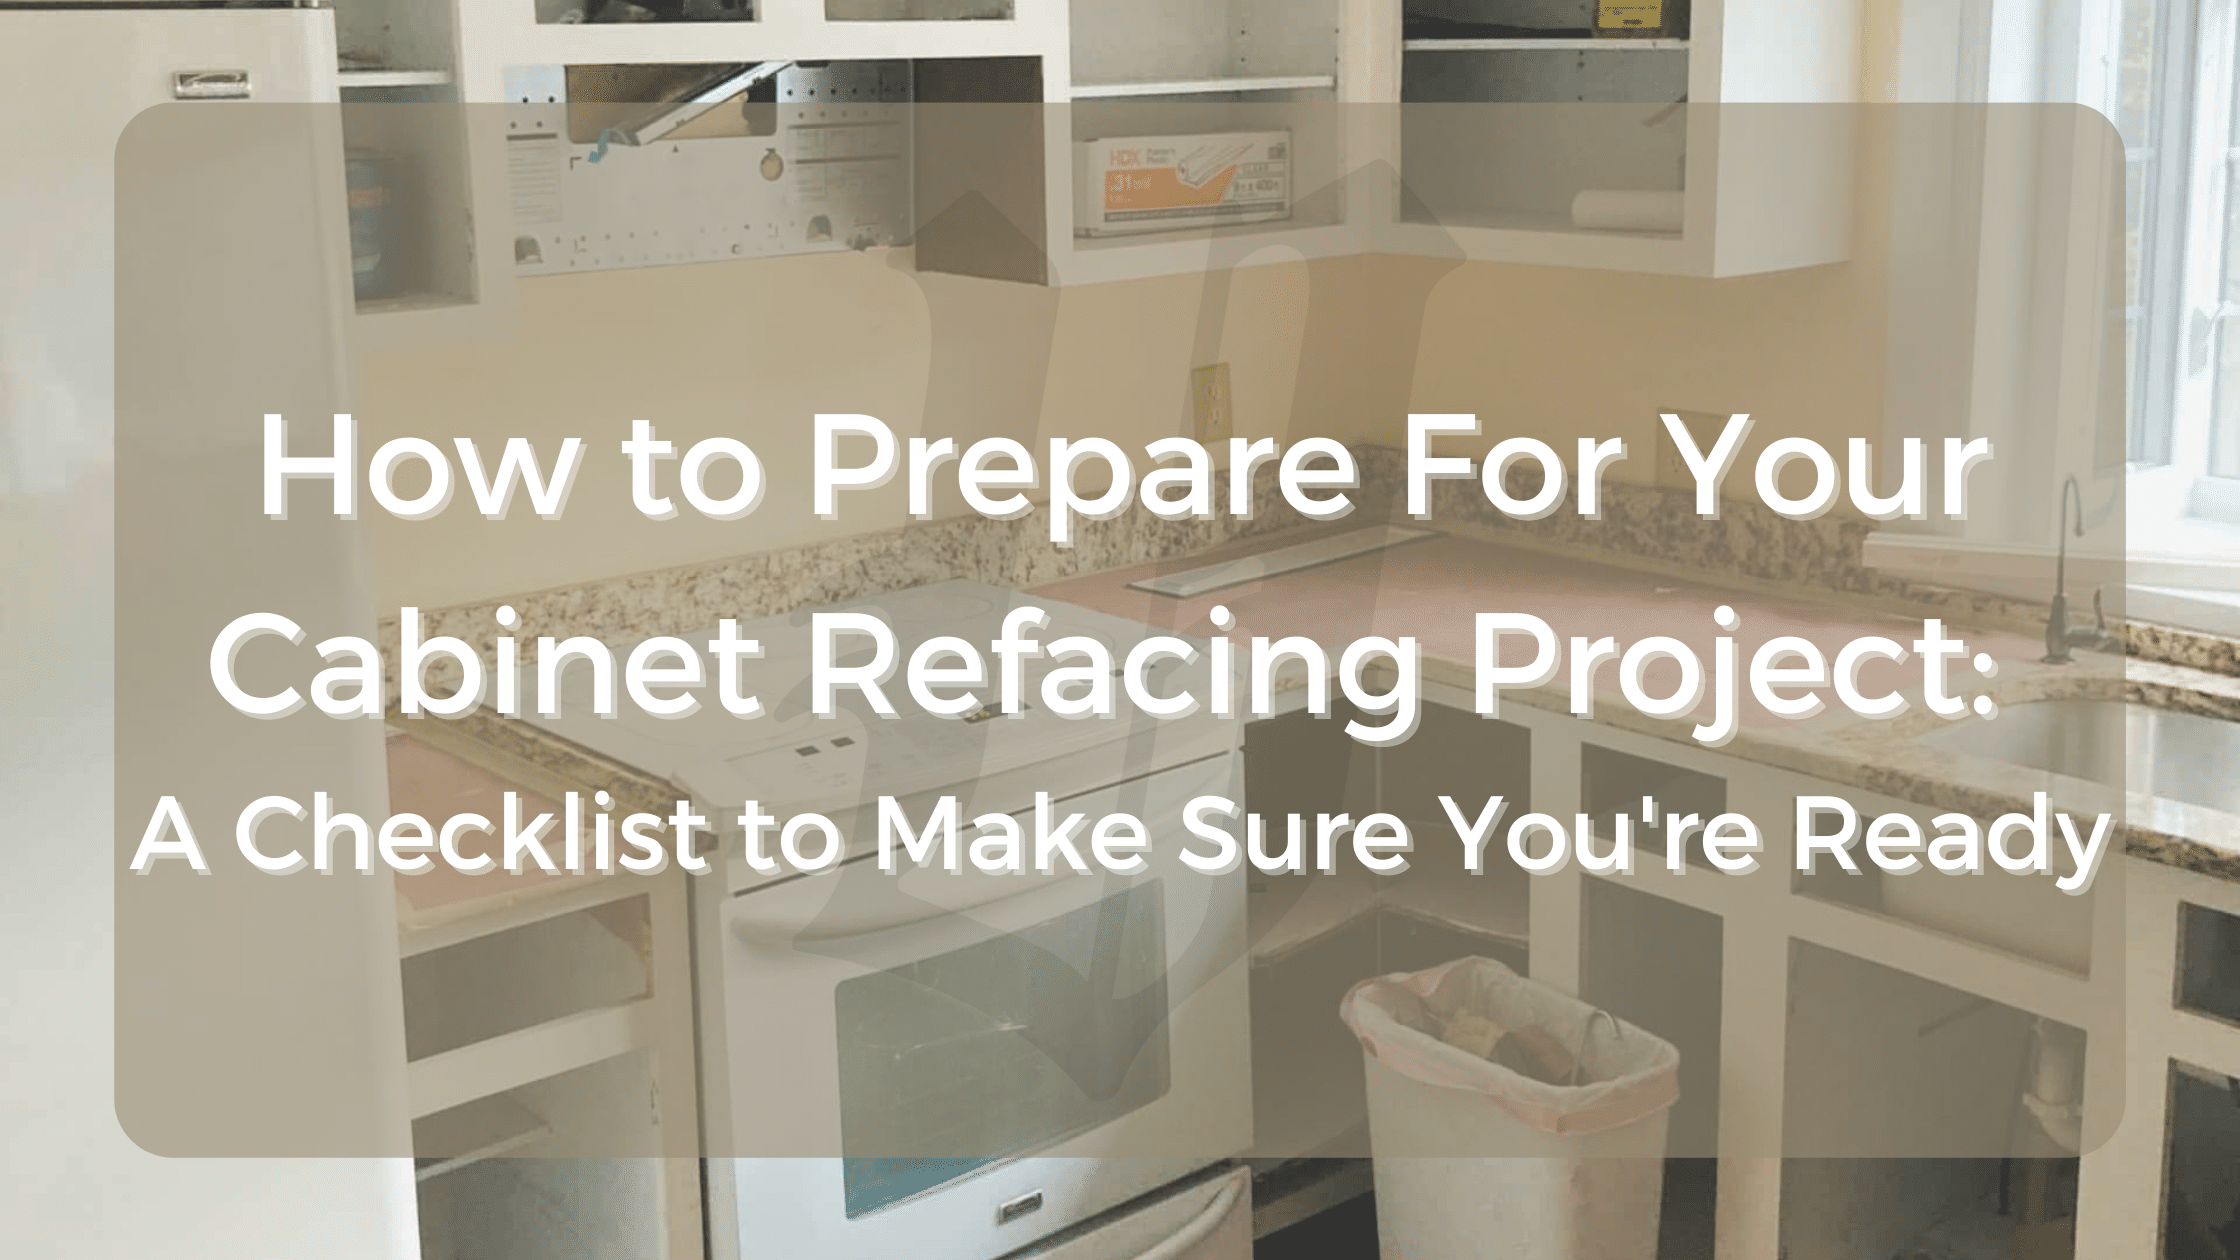 How to Prepare For Your Cabinet Refacing Project